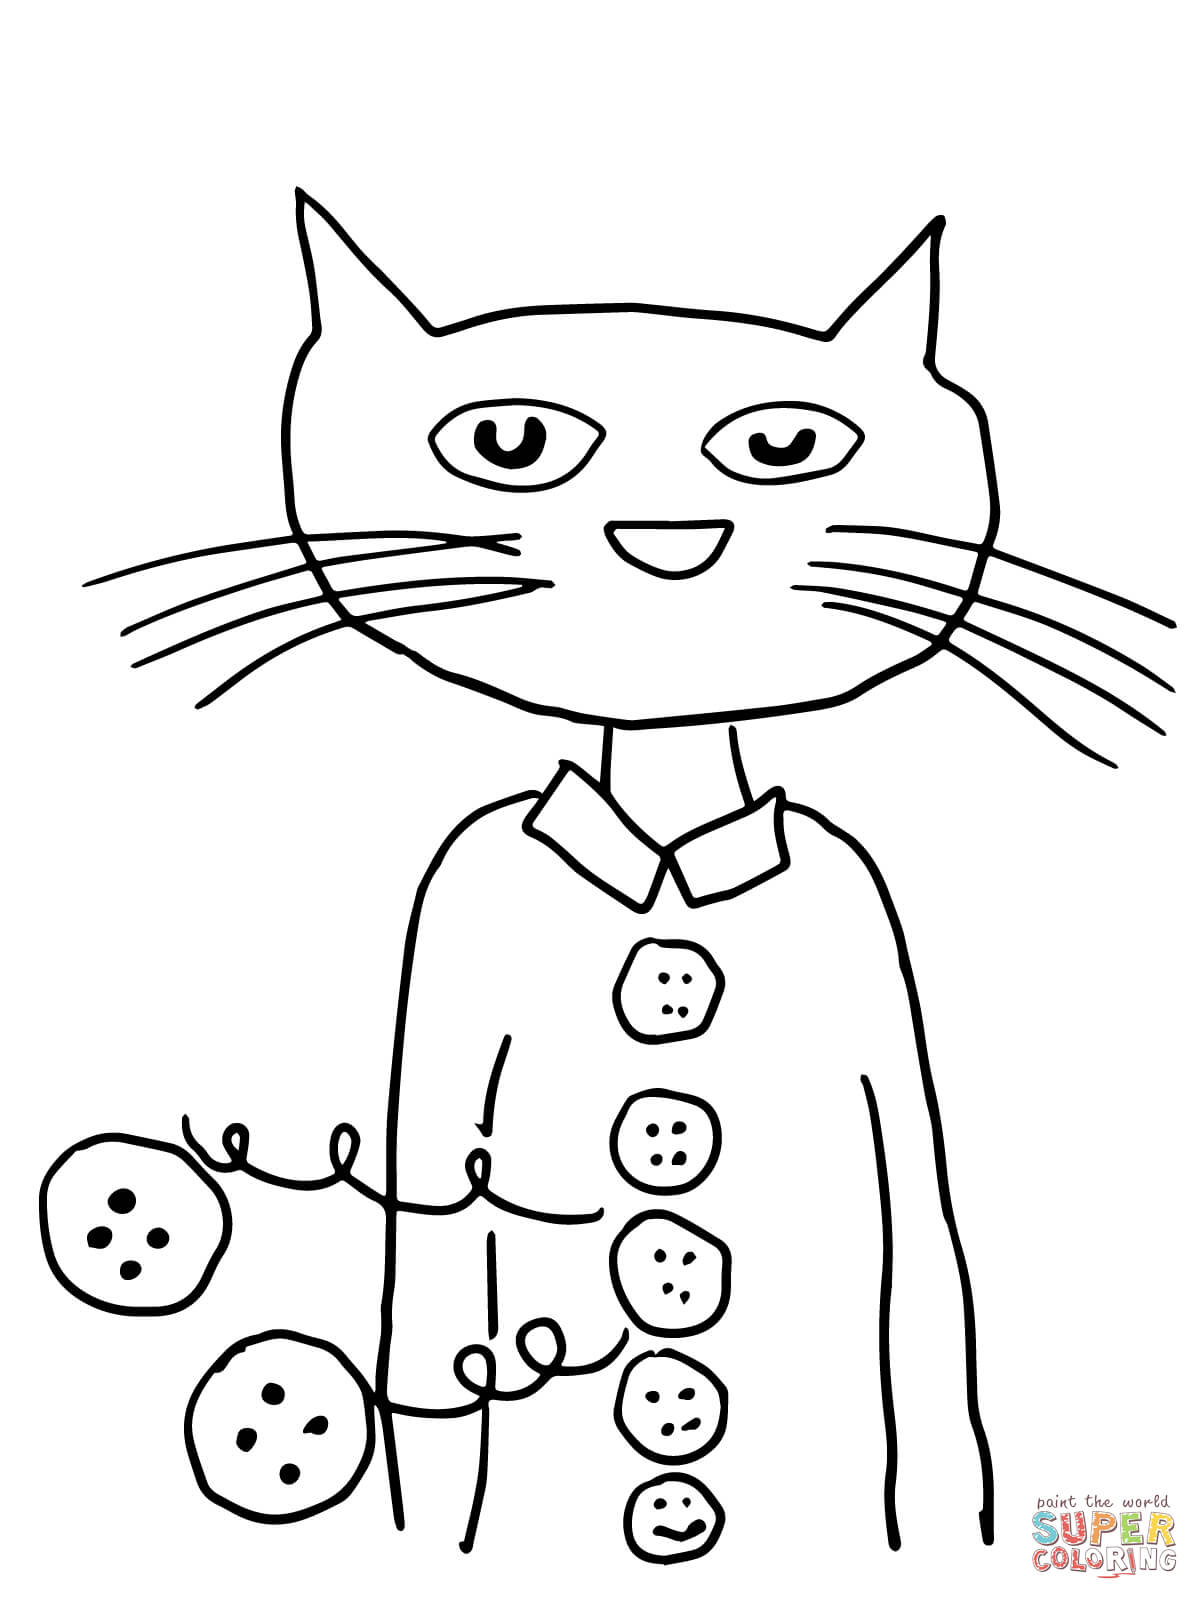 11 Pics of Pete The Cat Coloring Pages Free - Pete the Cat ...